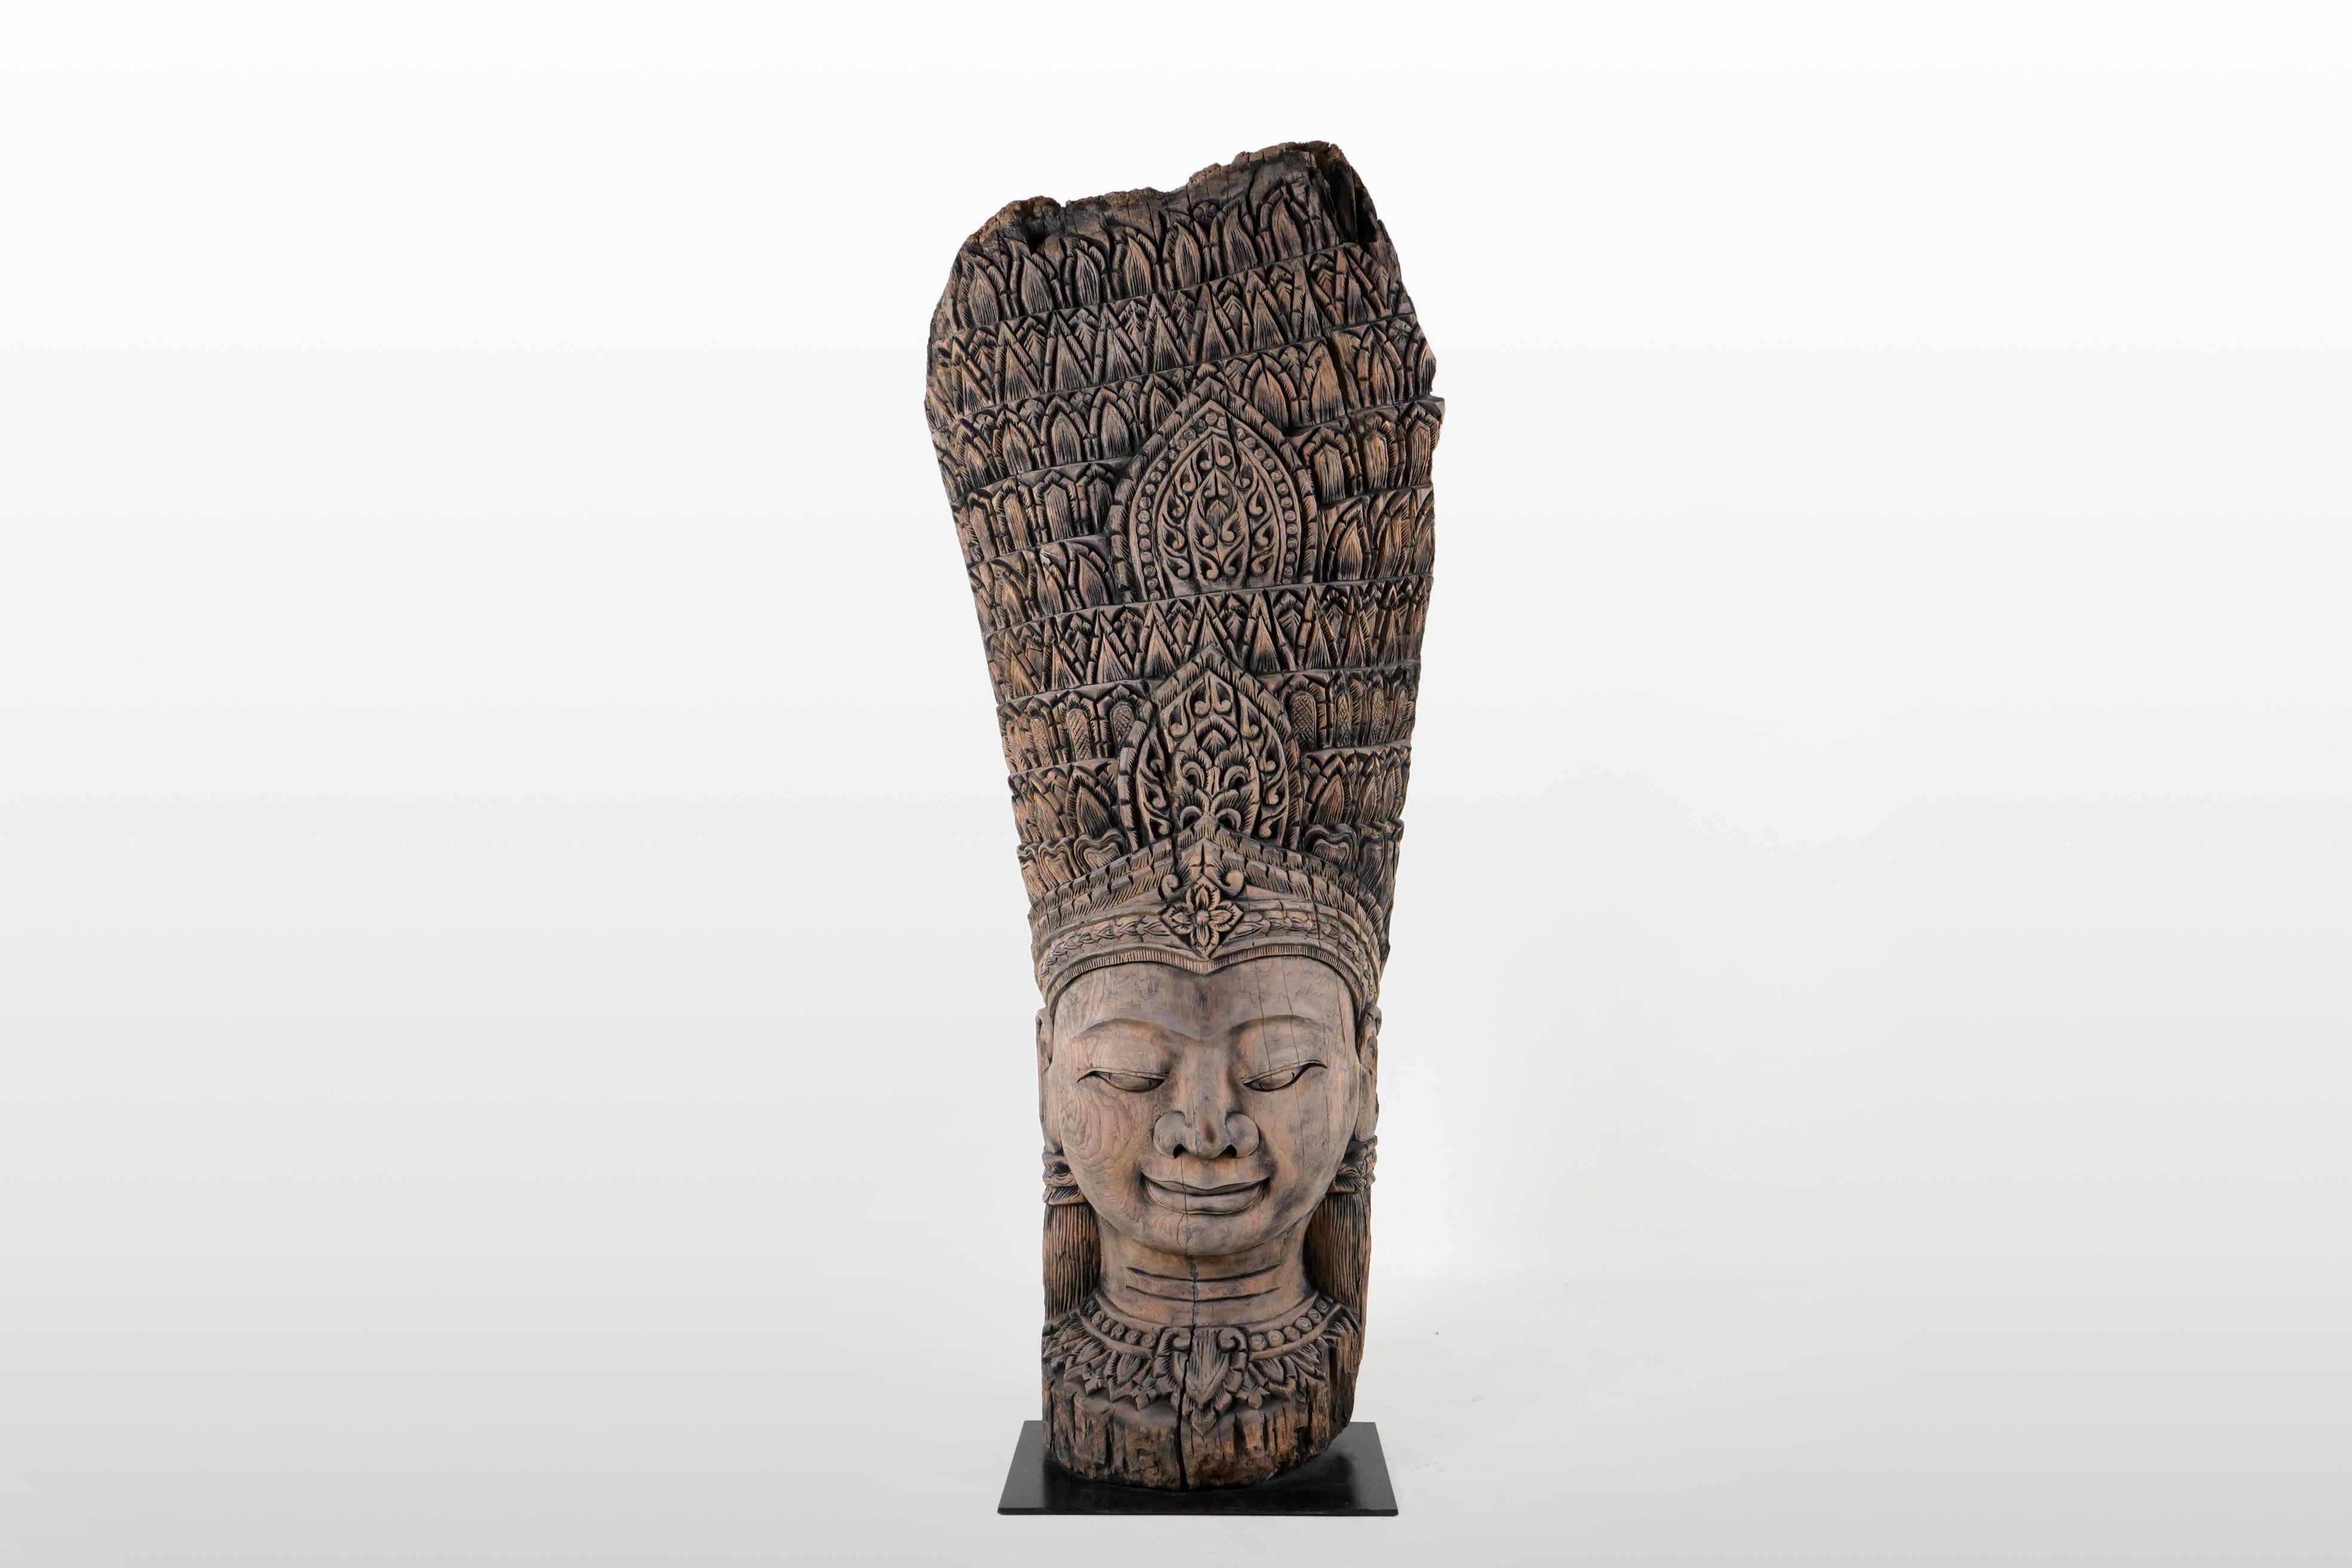 Newly carved from reclaimed teakwood, this bust takes the form of an apsara. With origins in both Hindu and Buddhist mythology, Apsaras are female spirits of the clouds and waters. They are also referred to as 